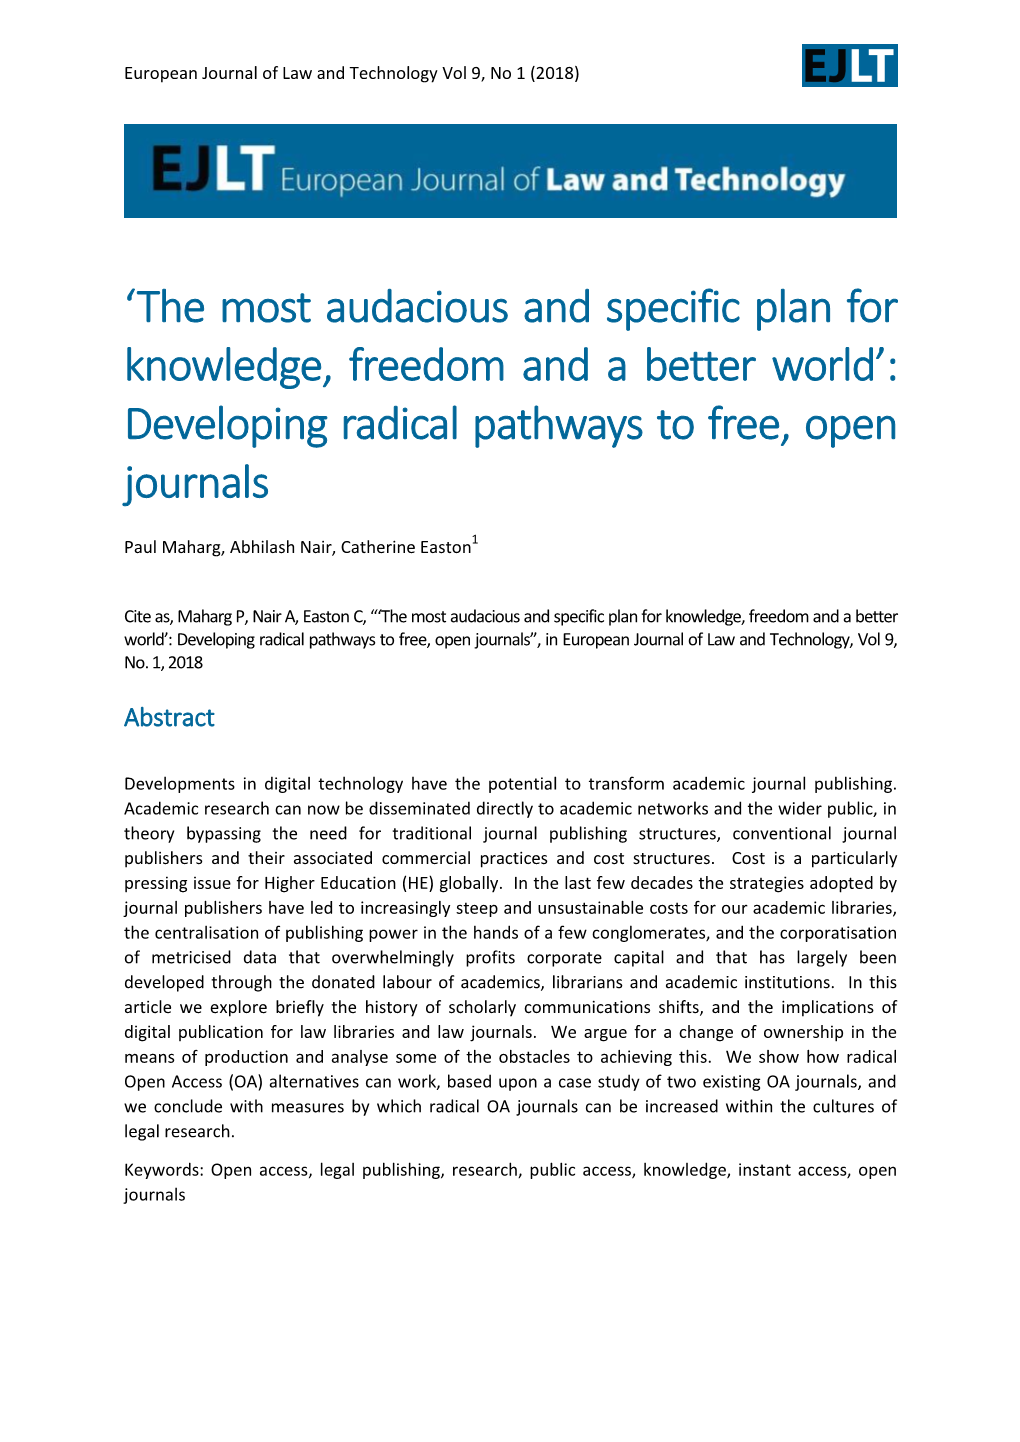 'The Most Audacious and Specific Plan for Knowledge, Freedom and a Better World': Developing Radical Pathways to Free, Open